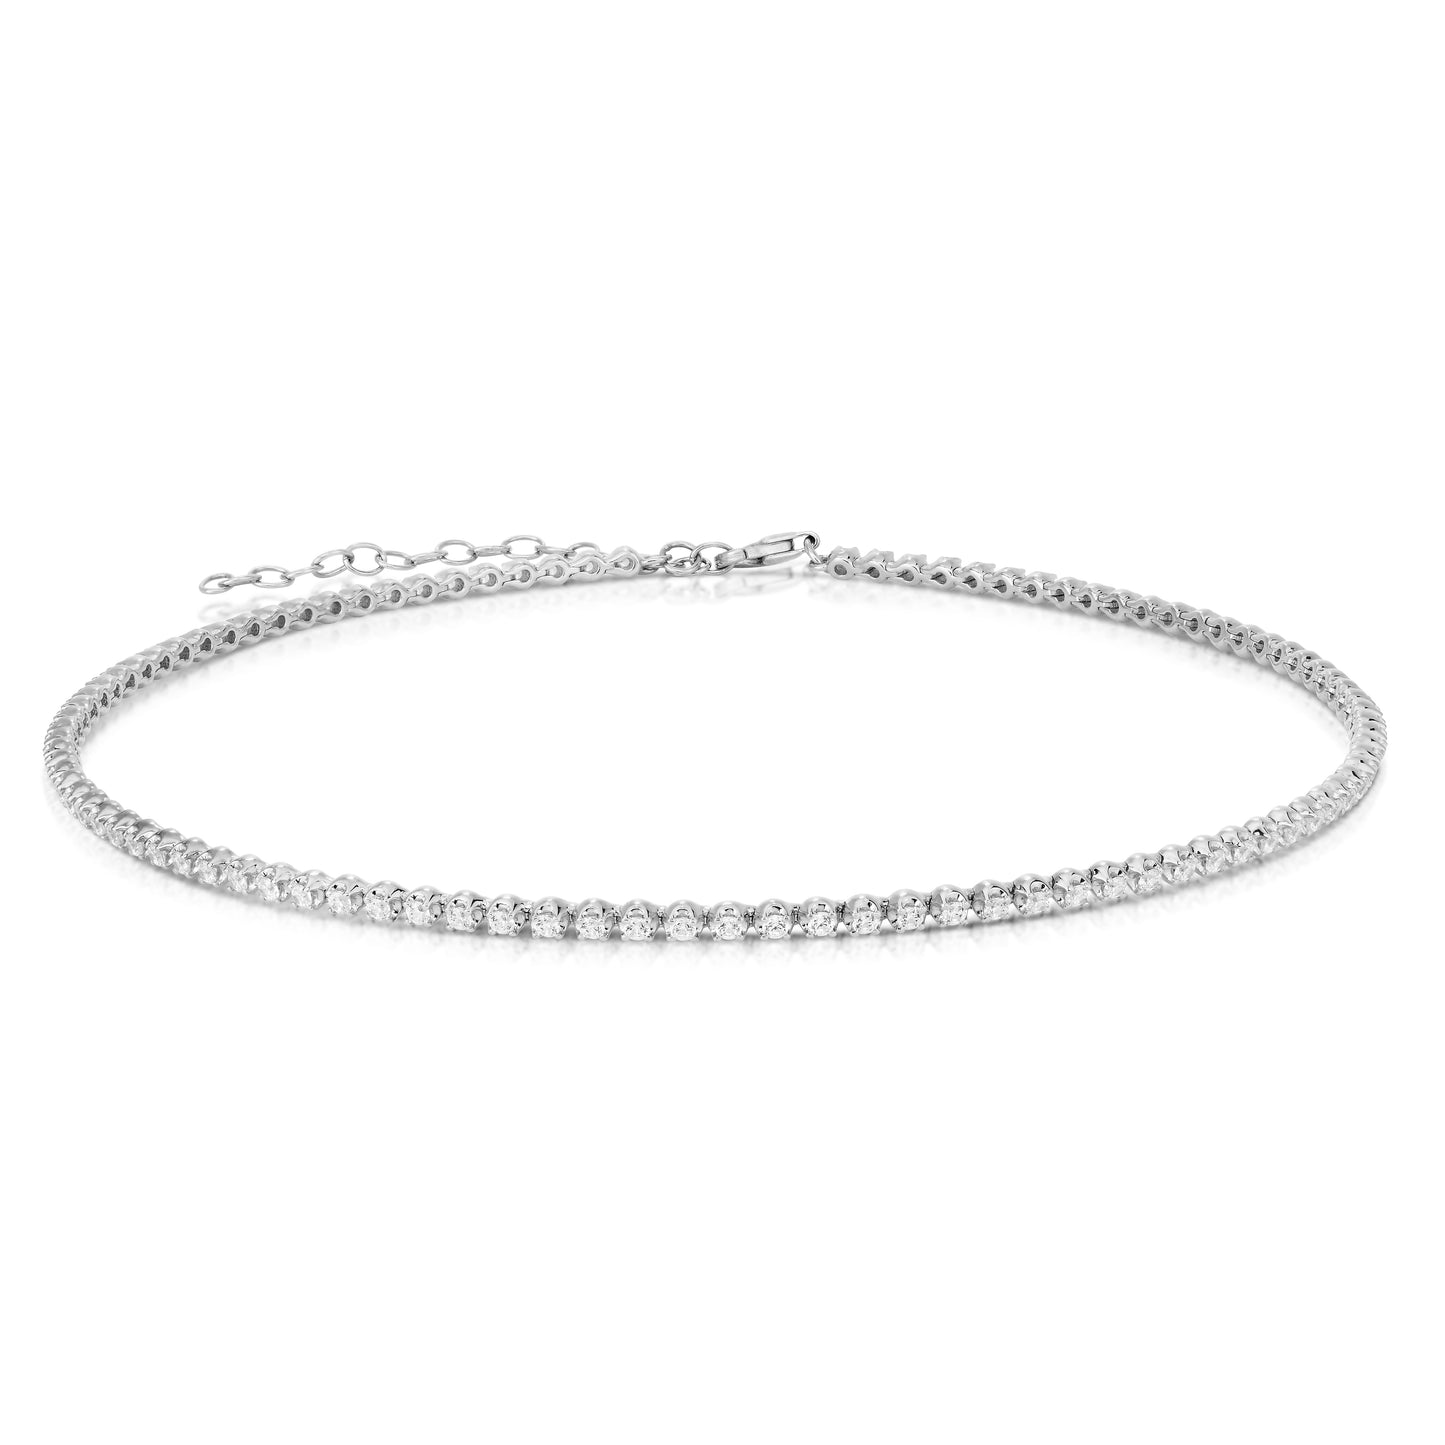 Buttercup Diamond Choker Necklace in 14K White Gold